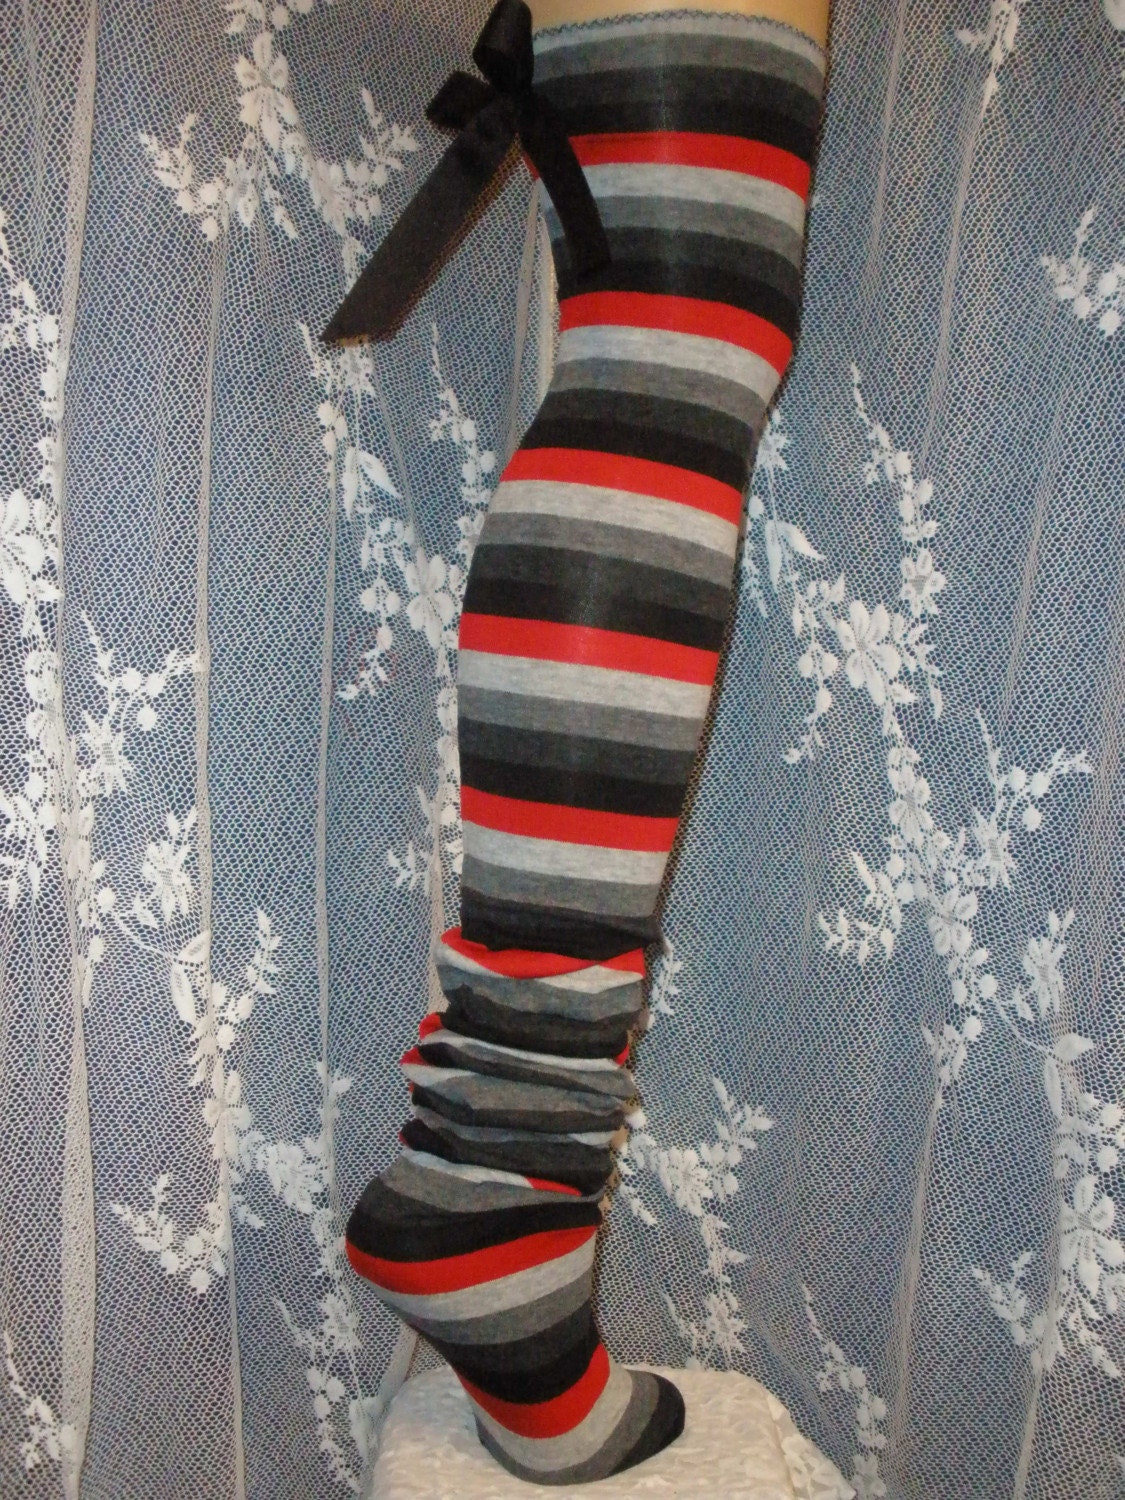 Adorable 2 Wear Scrunchie Stocking Socks with Attractive Bow on Back, (Last Pair of this Style Print)